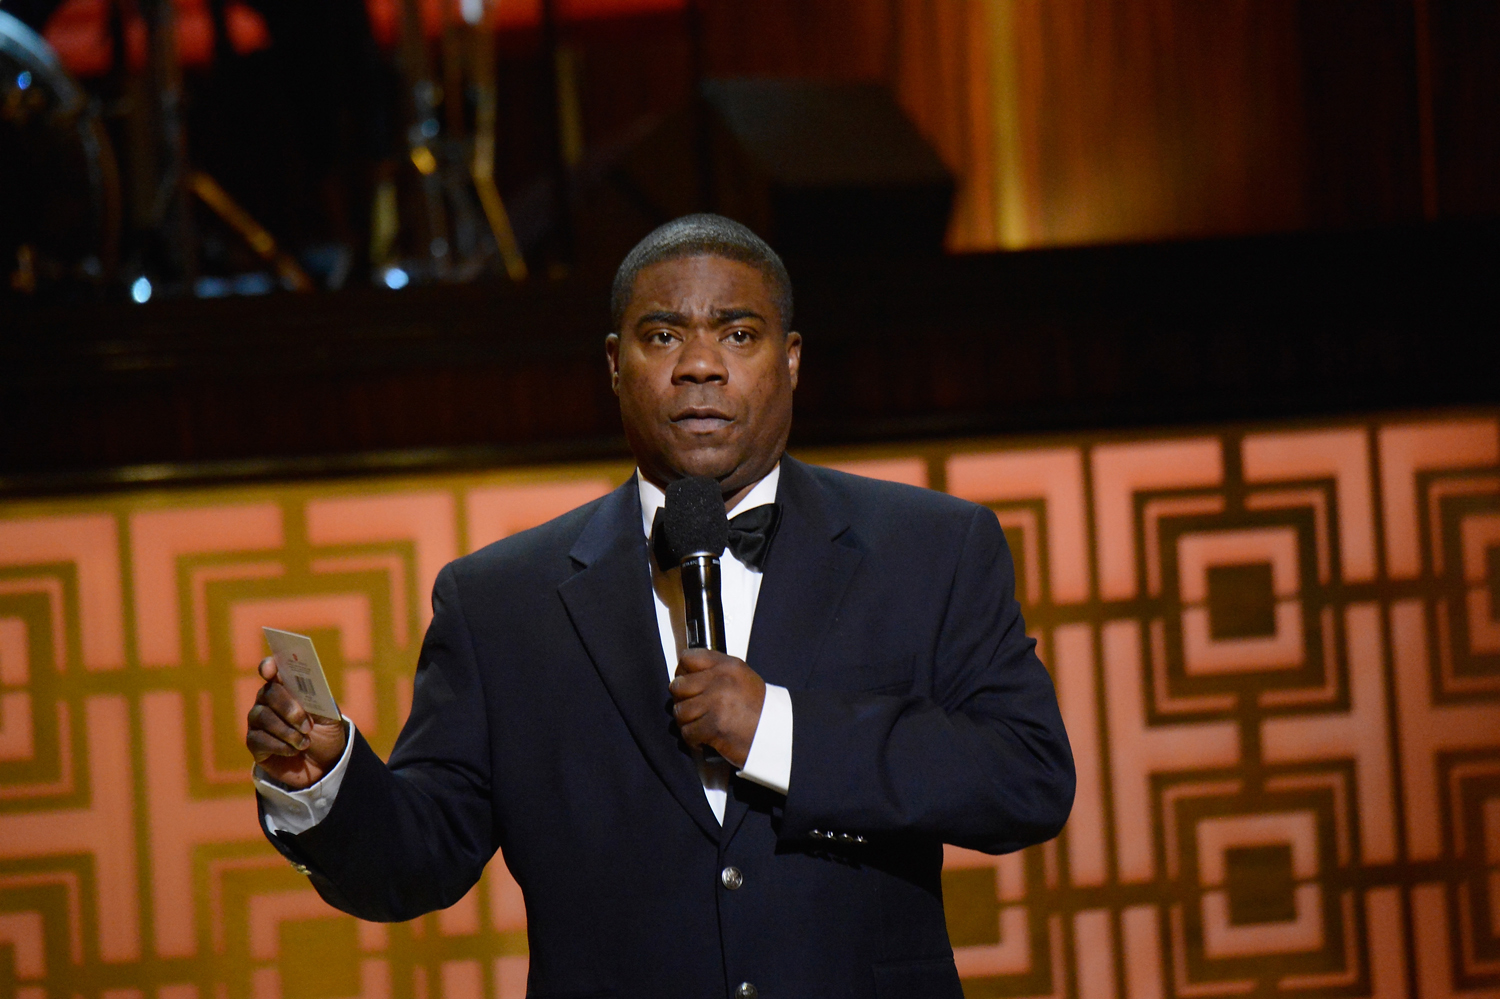 Tracy Morgan speaks onstage at Spike TV's "Don Rickles: One Night Only" on May 6, 2014 in New York.